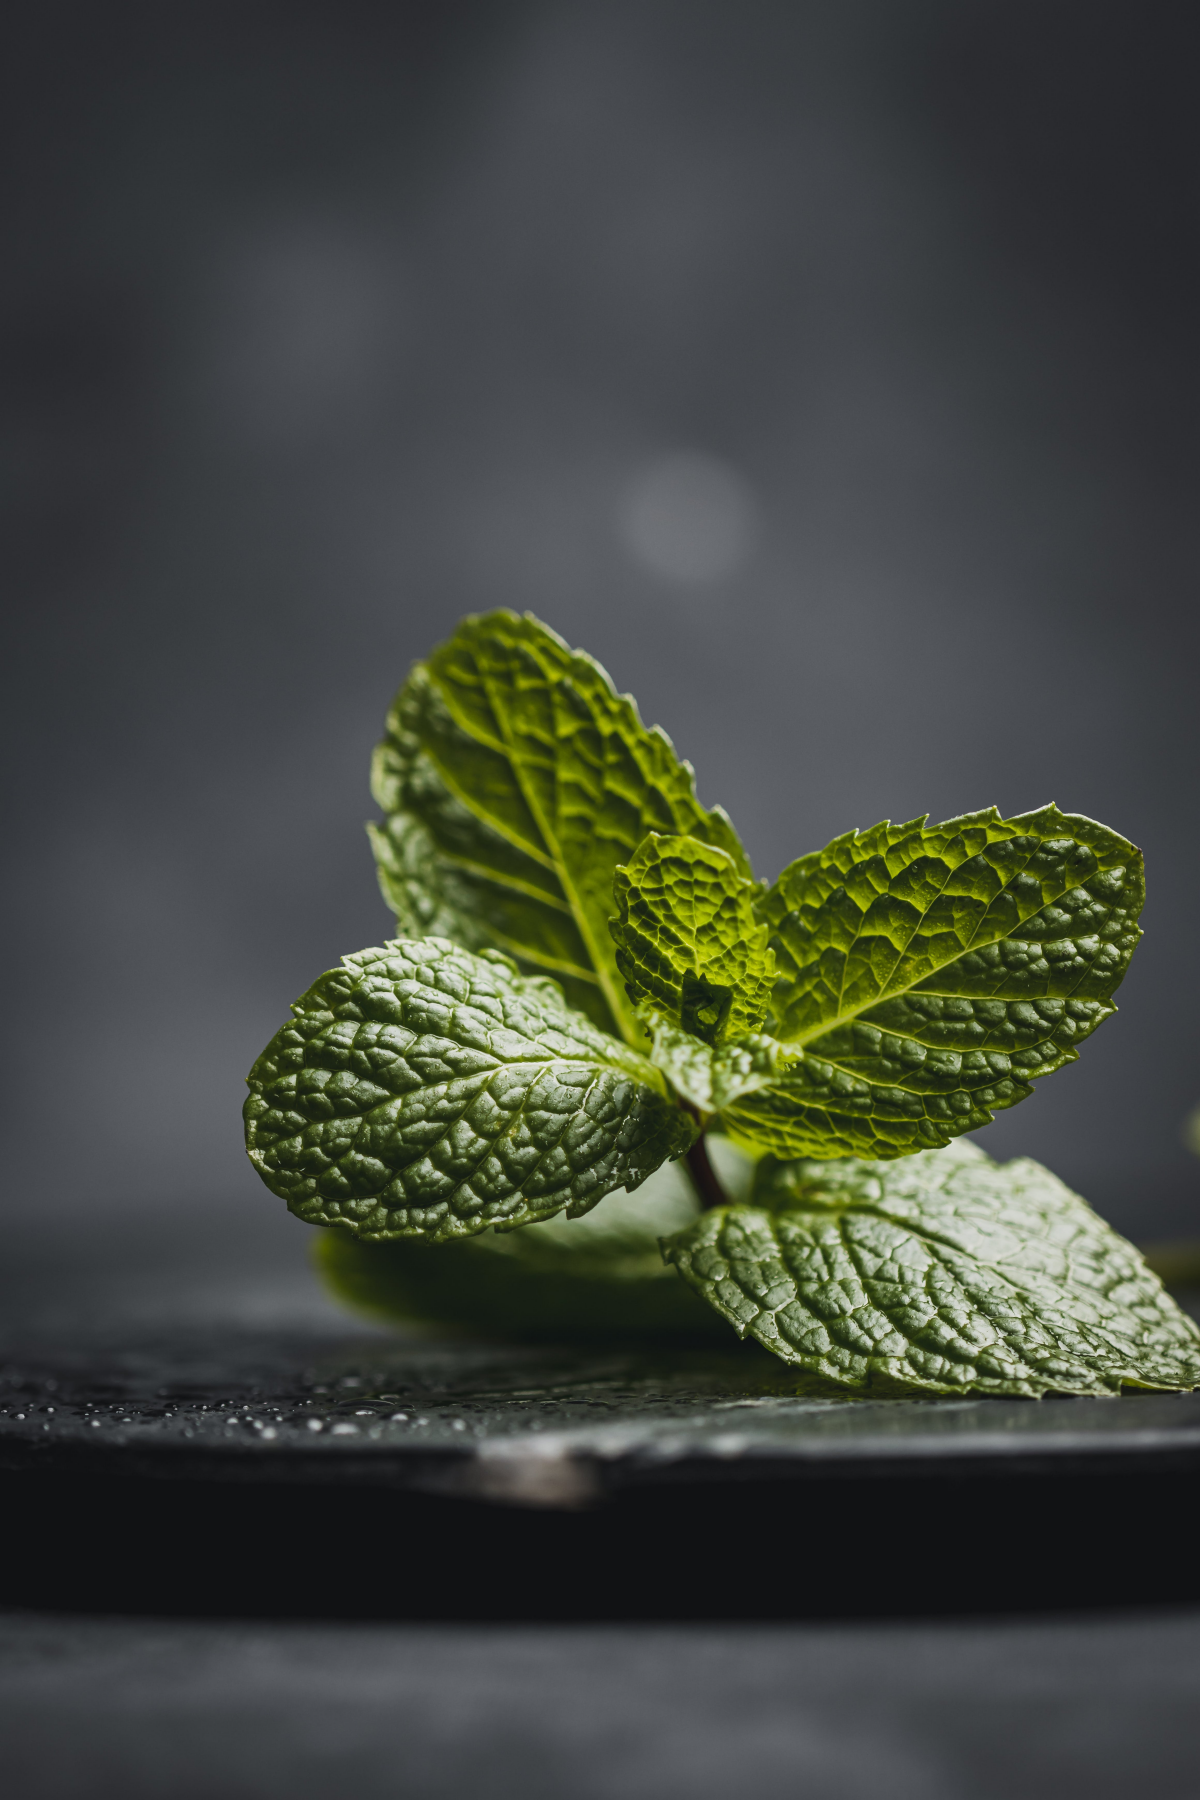 green peppermint leaves